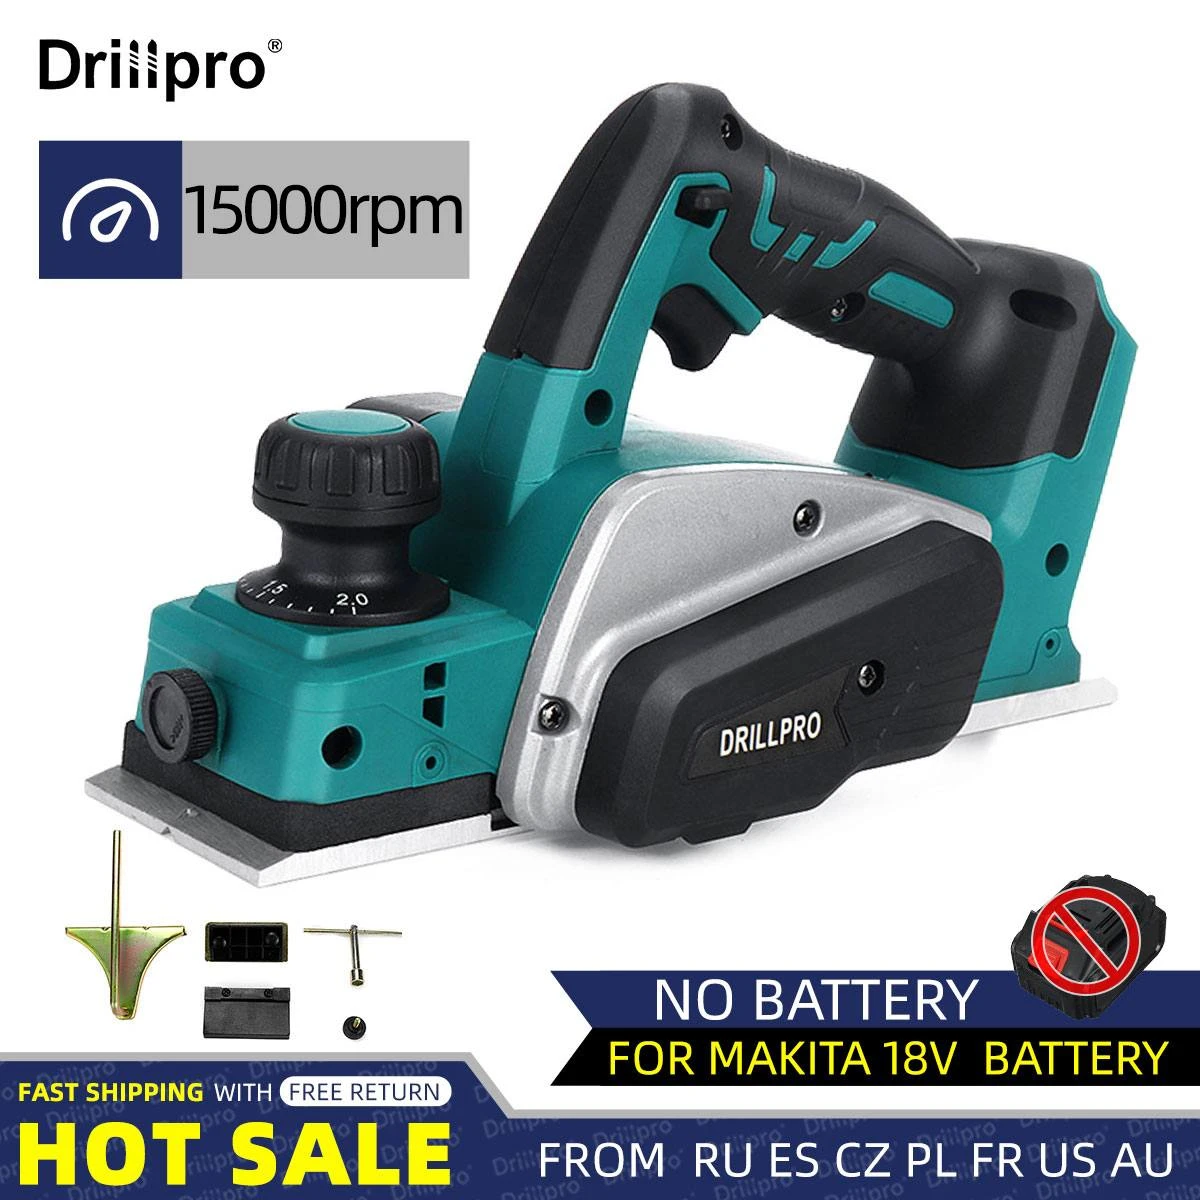 Drillpro 18V 15000r/min Cordless Electric Planer with Wrench Handheld Rechargeable for Makita 18V Battery Wood Cutting